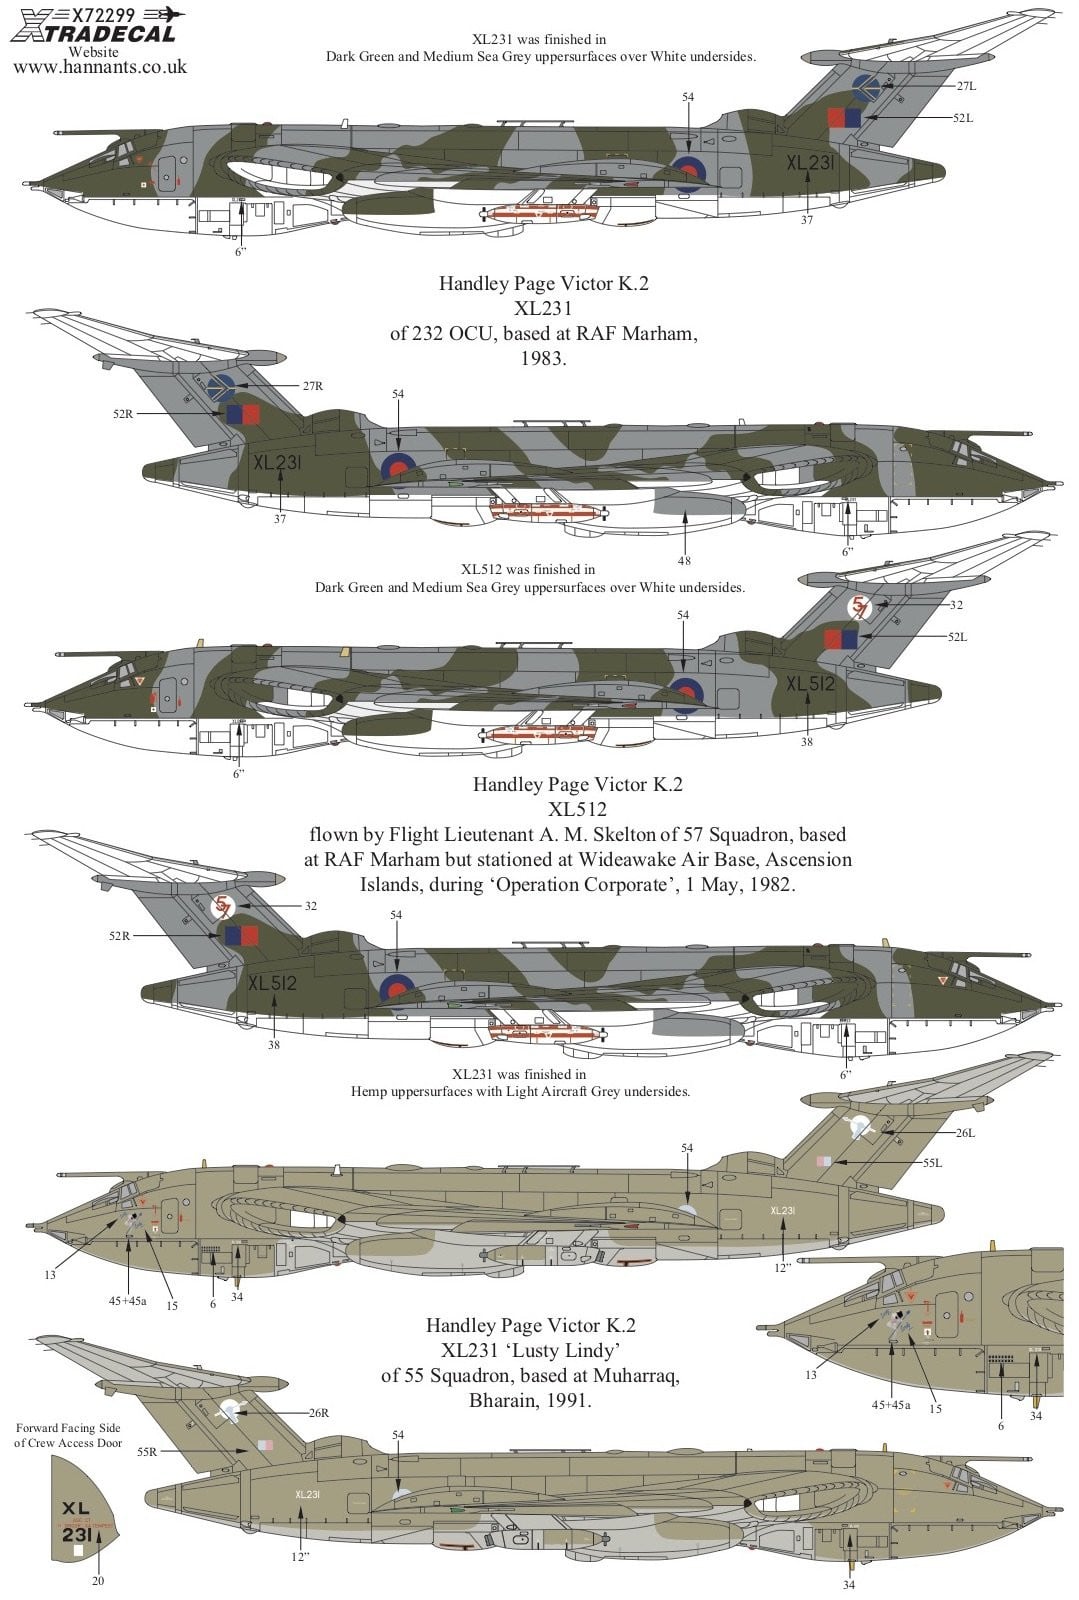 Xtradecal X72299 1/72 Handley-Page Victor K.2 Collection Model Decals - SGS Model Store